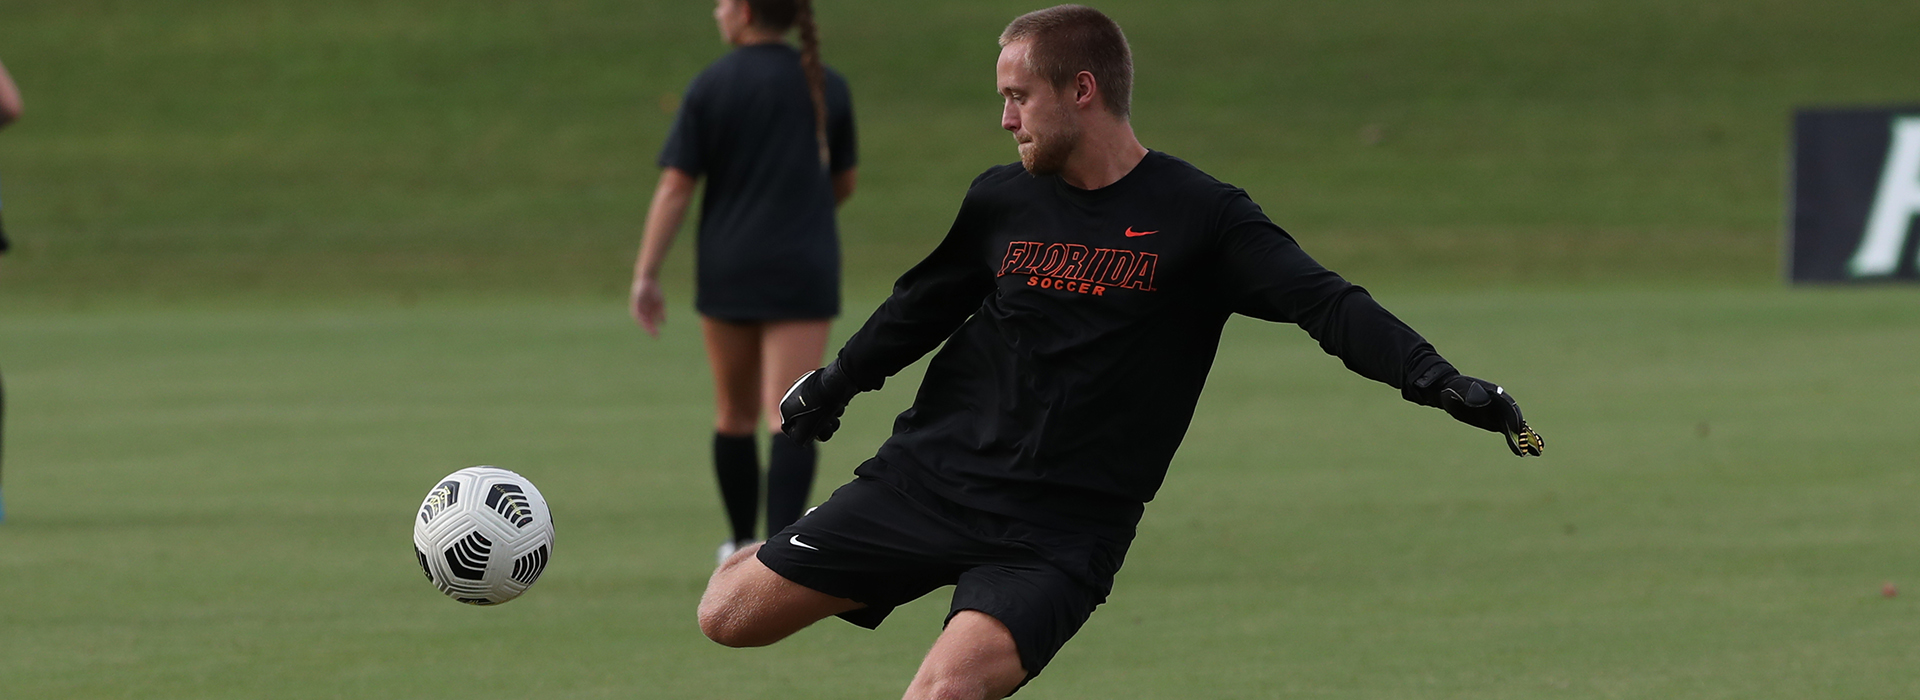 Jack Rushworth added to Tech soccer coaching staff